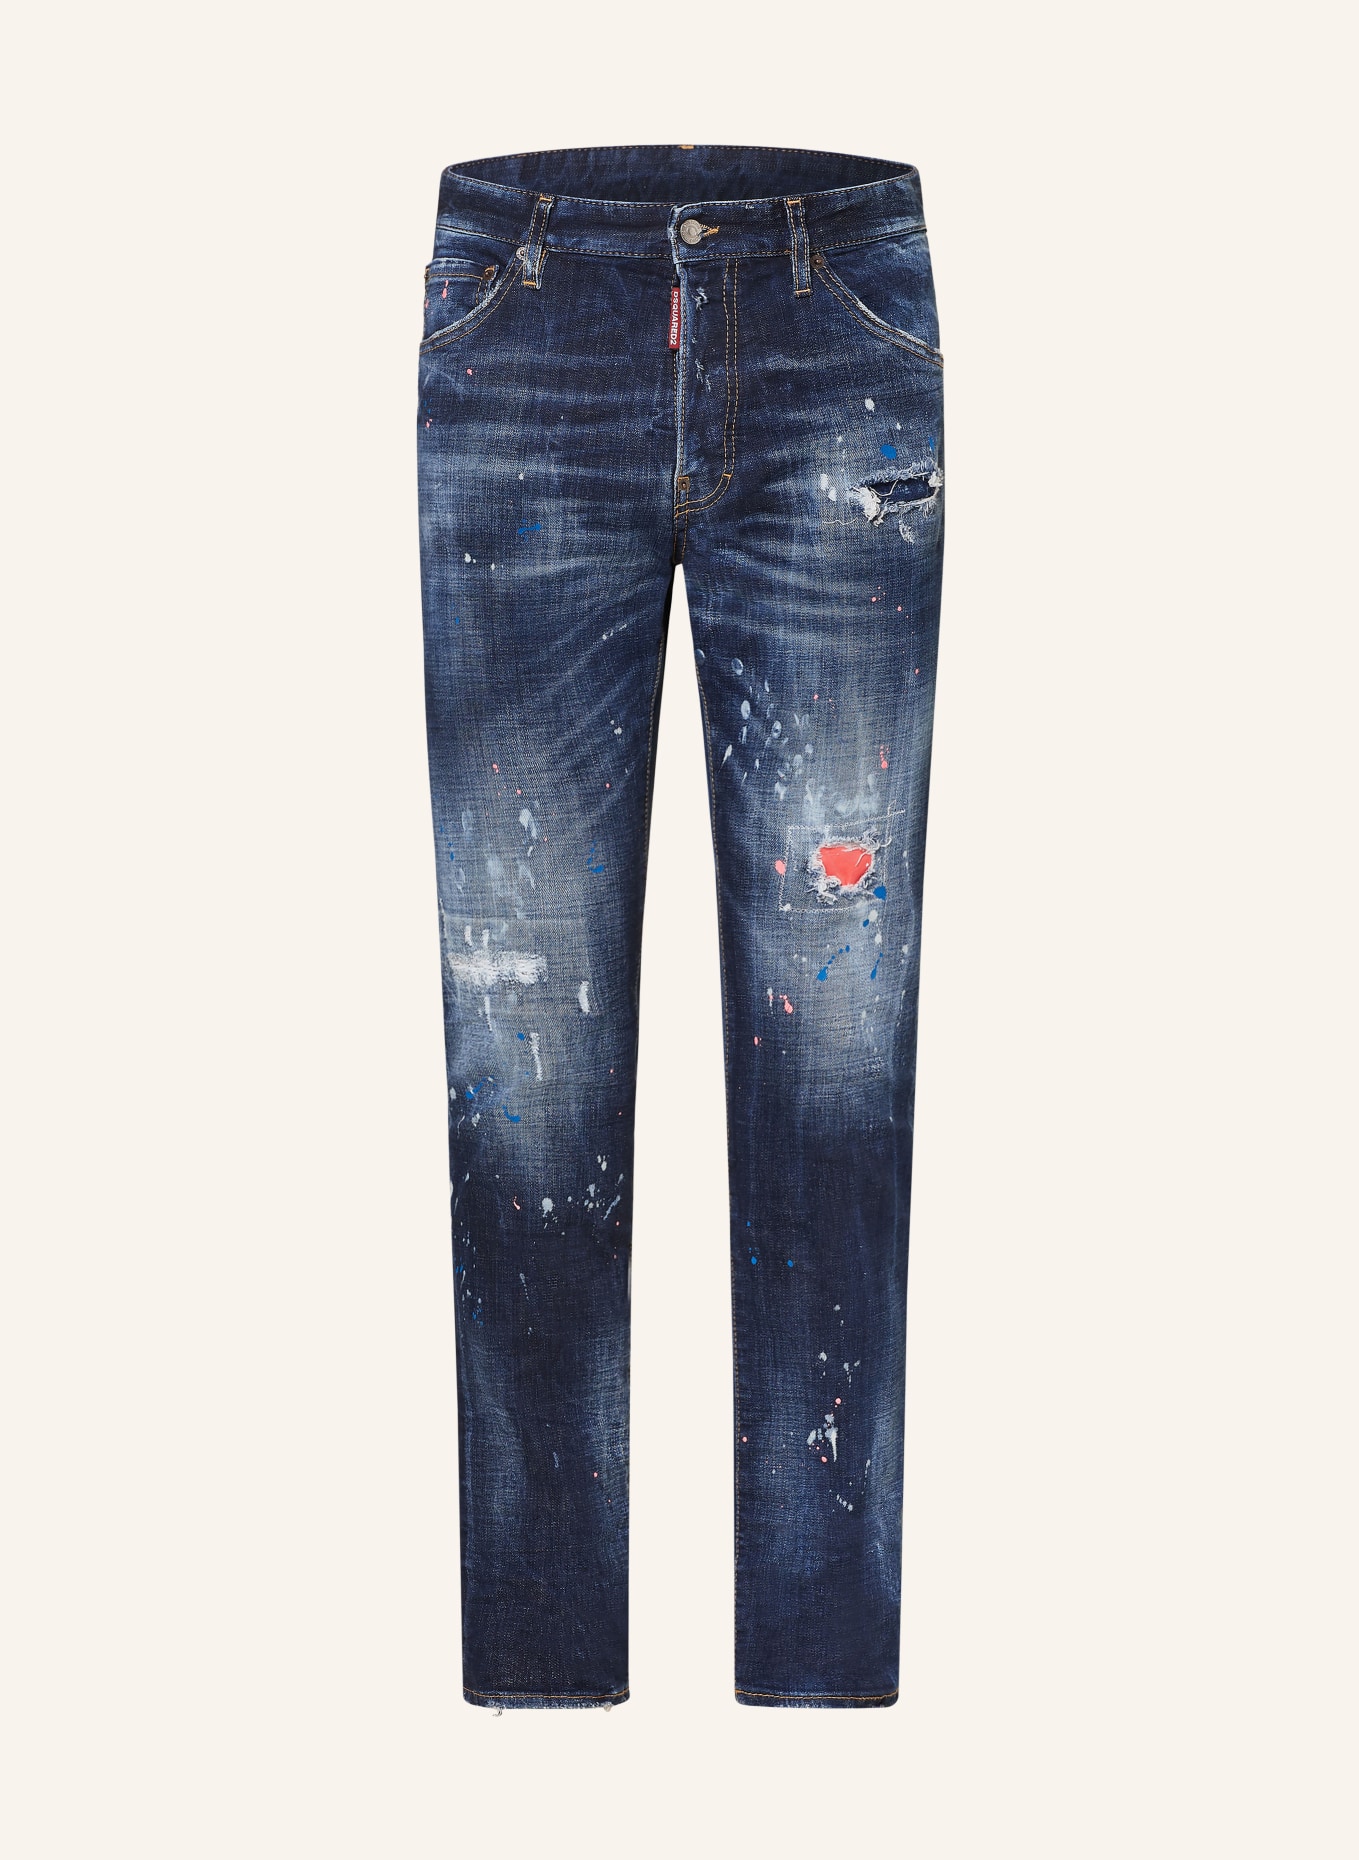 DSQUARED2 Destroyed Jeans COOL GUY Slim Fit, Farbe: 470 BLUE NAVY (Bild 1)